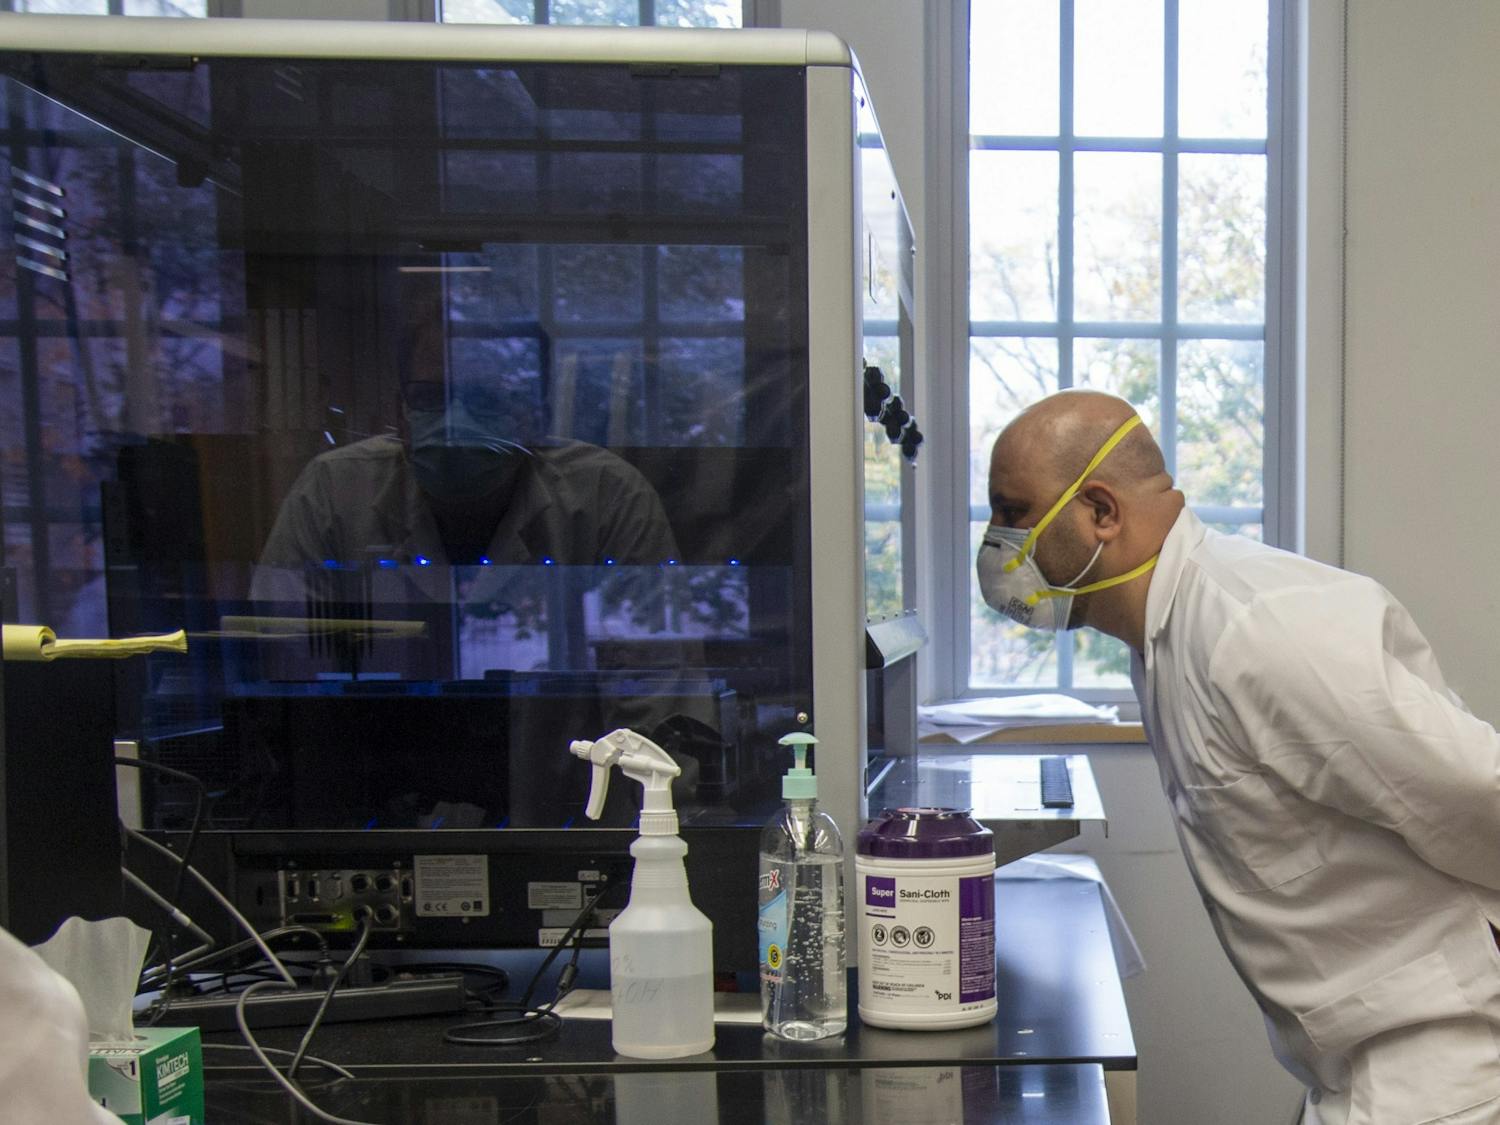 GALLERY: IU's new COVID-19 testing labs give insight into testing process